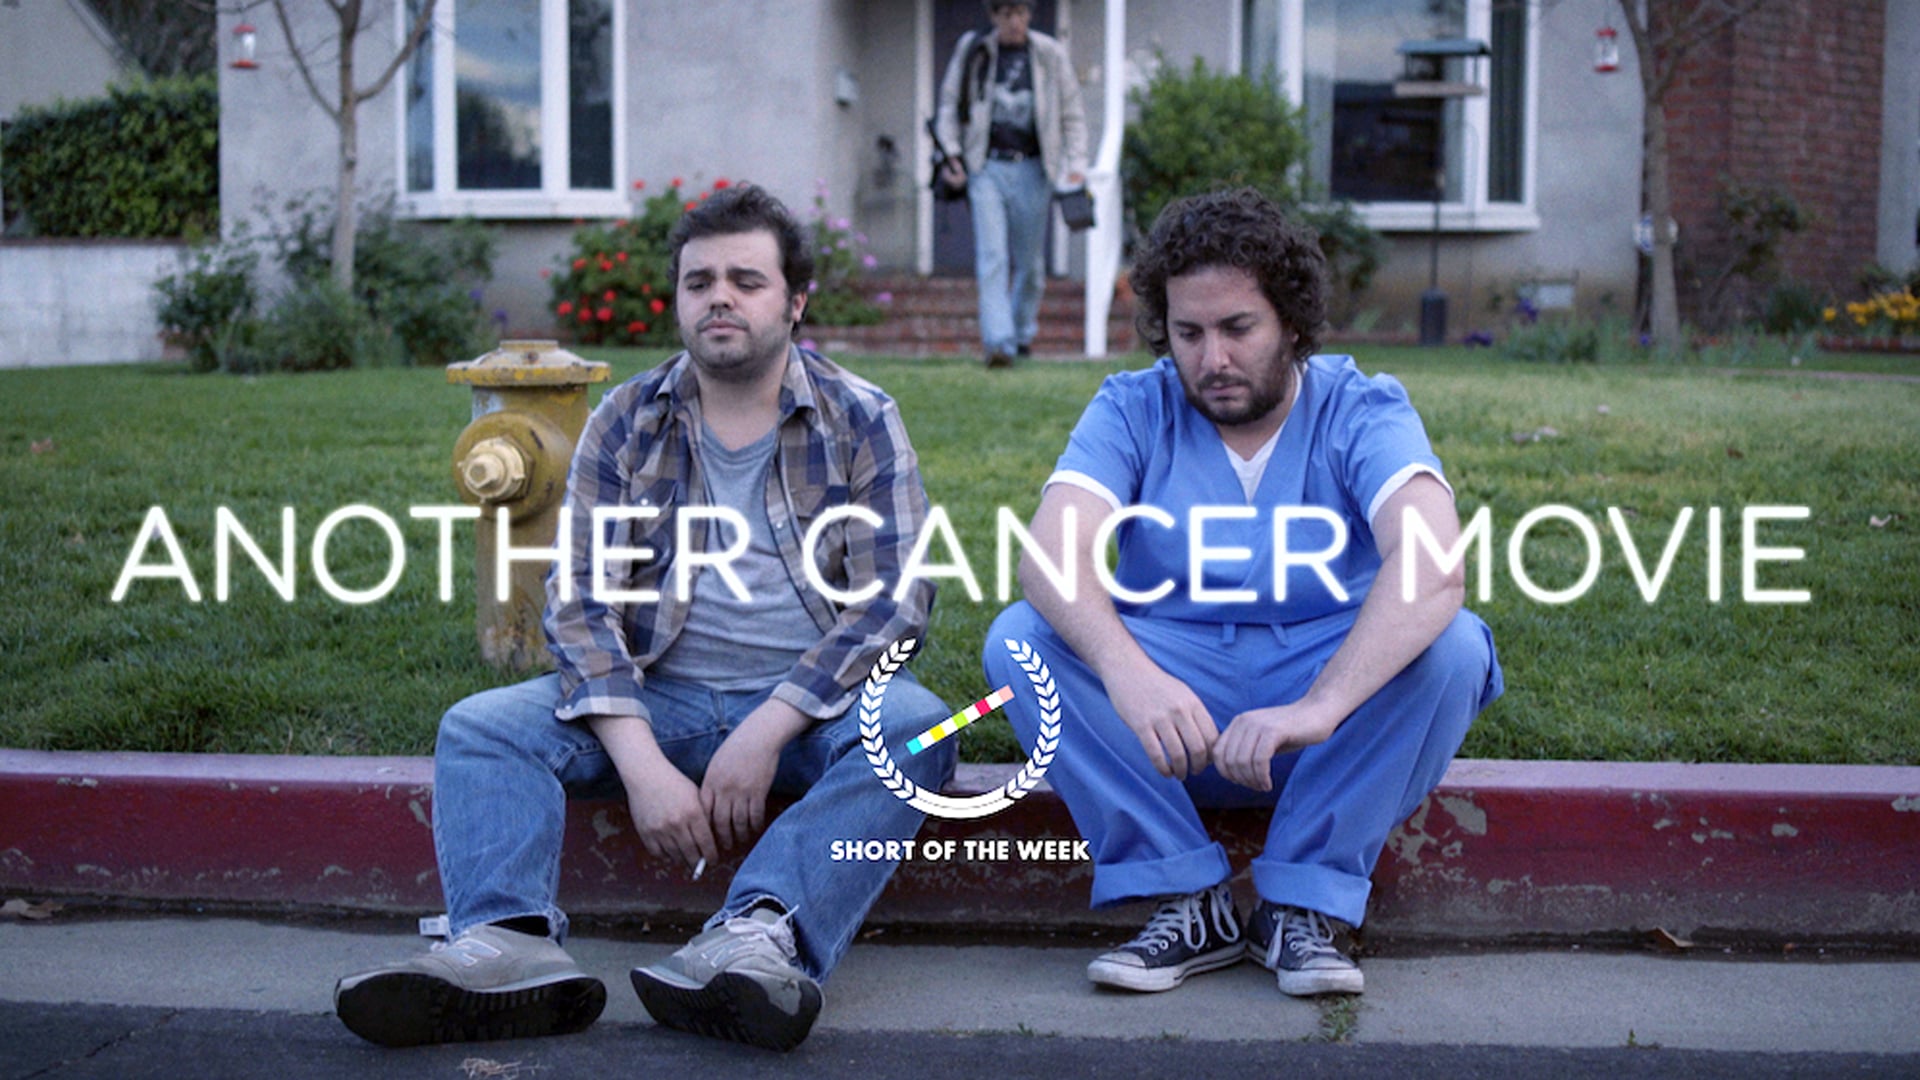 ANOTHER CANCER MOVIE